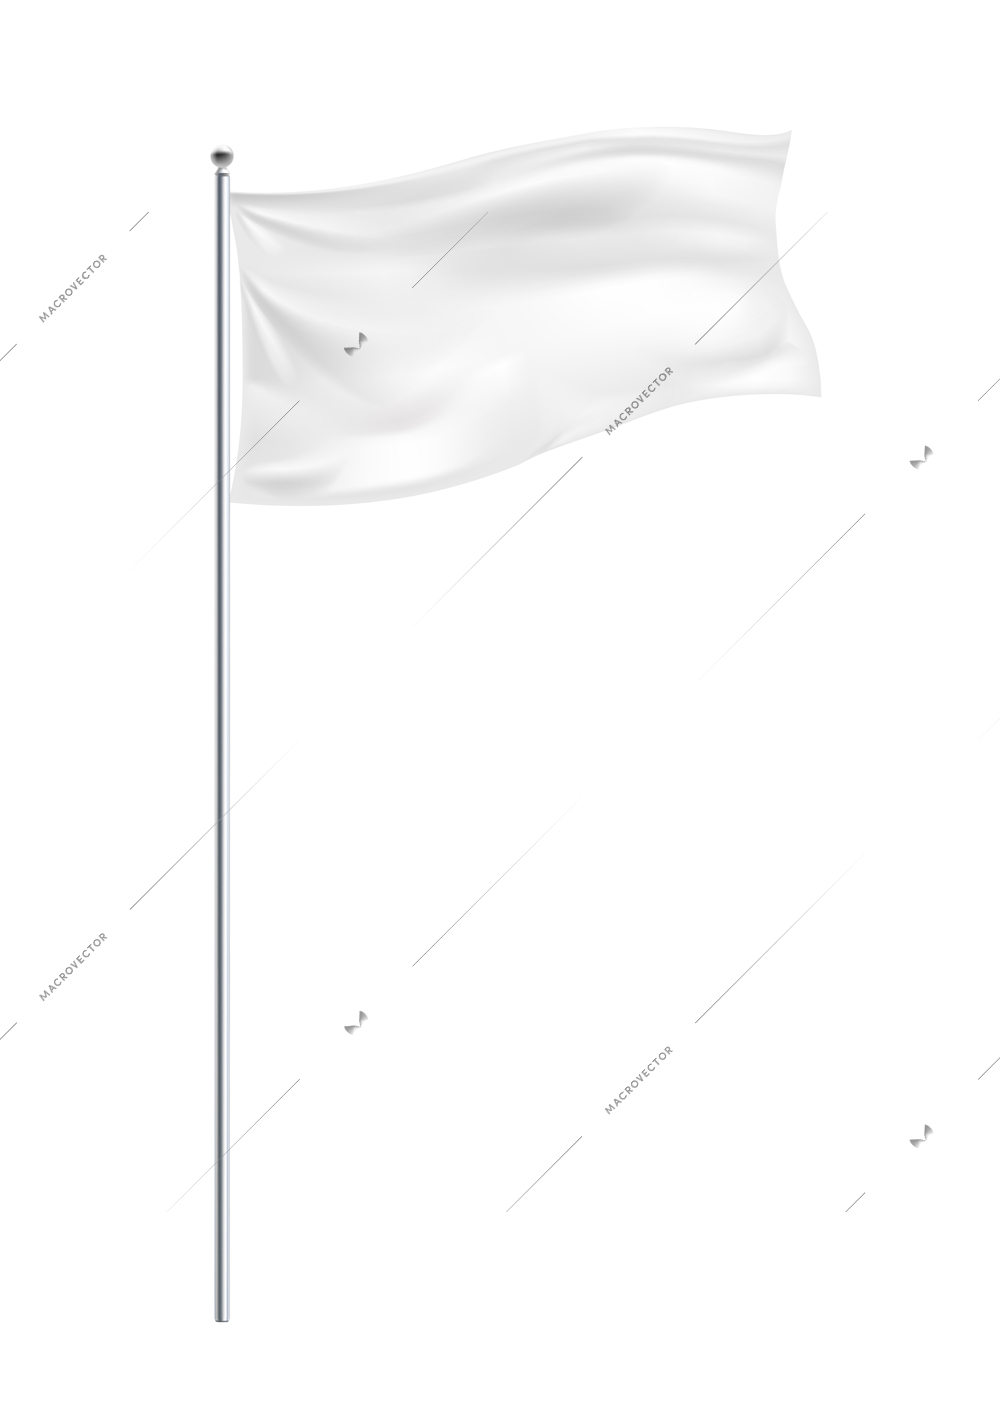 Realistic composition with isolated image of waving white flag on post on blank background vector illustration